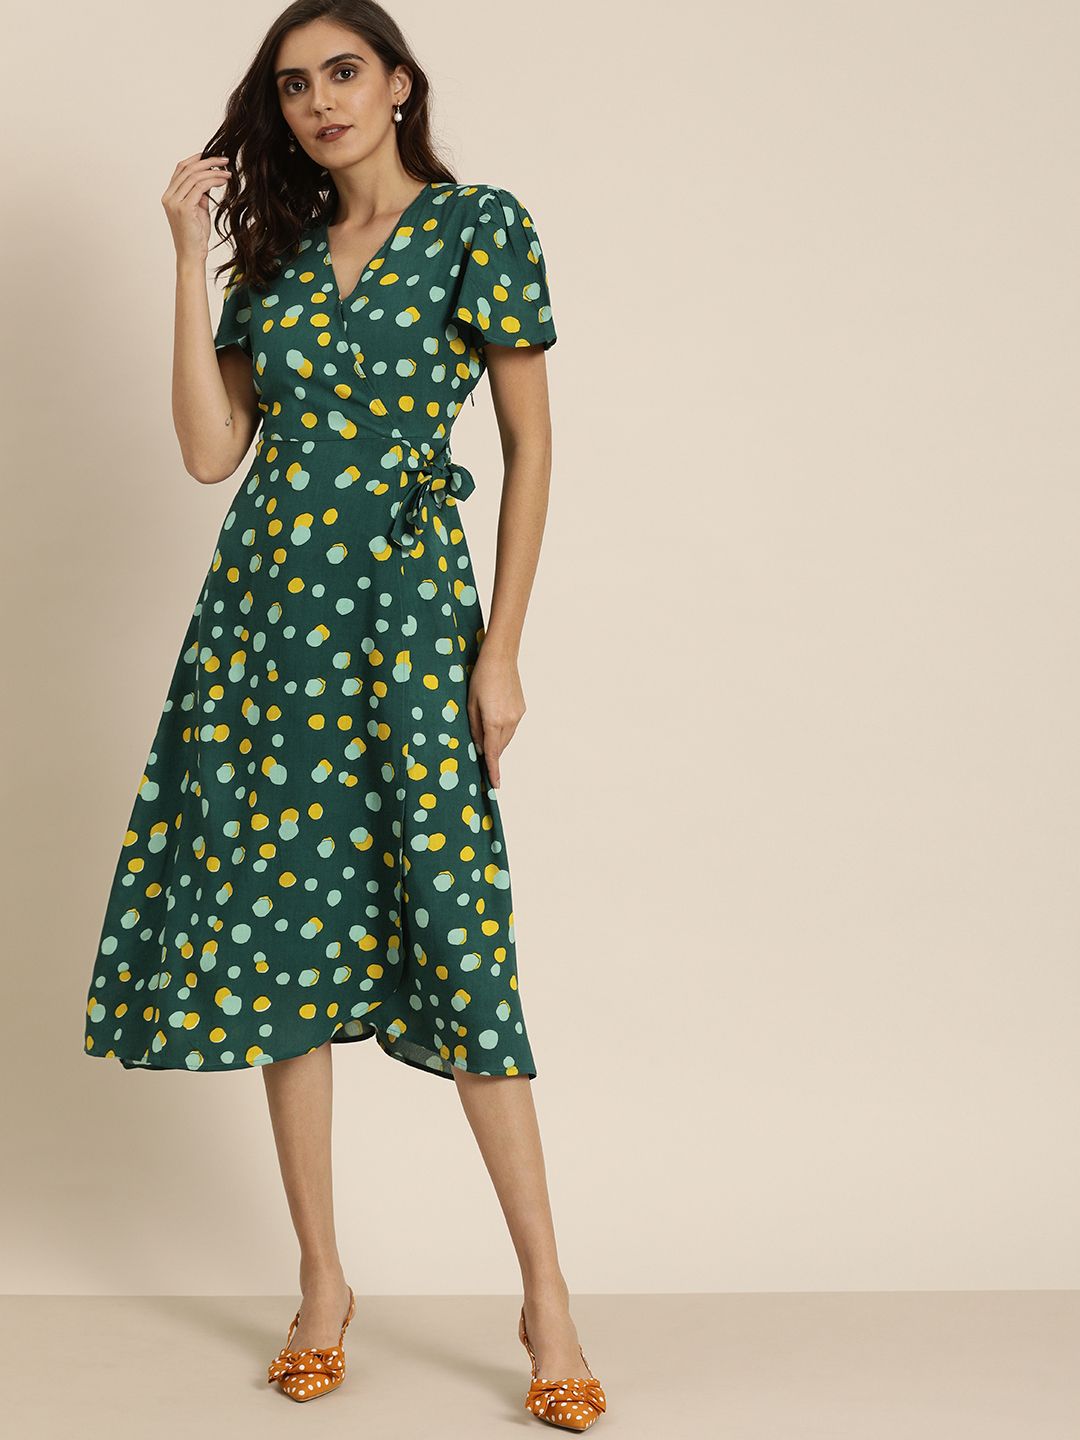 all about you Women Green Printed Fit and Flare Dress Price in India